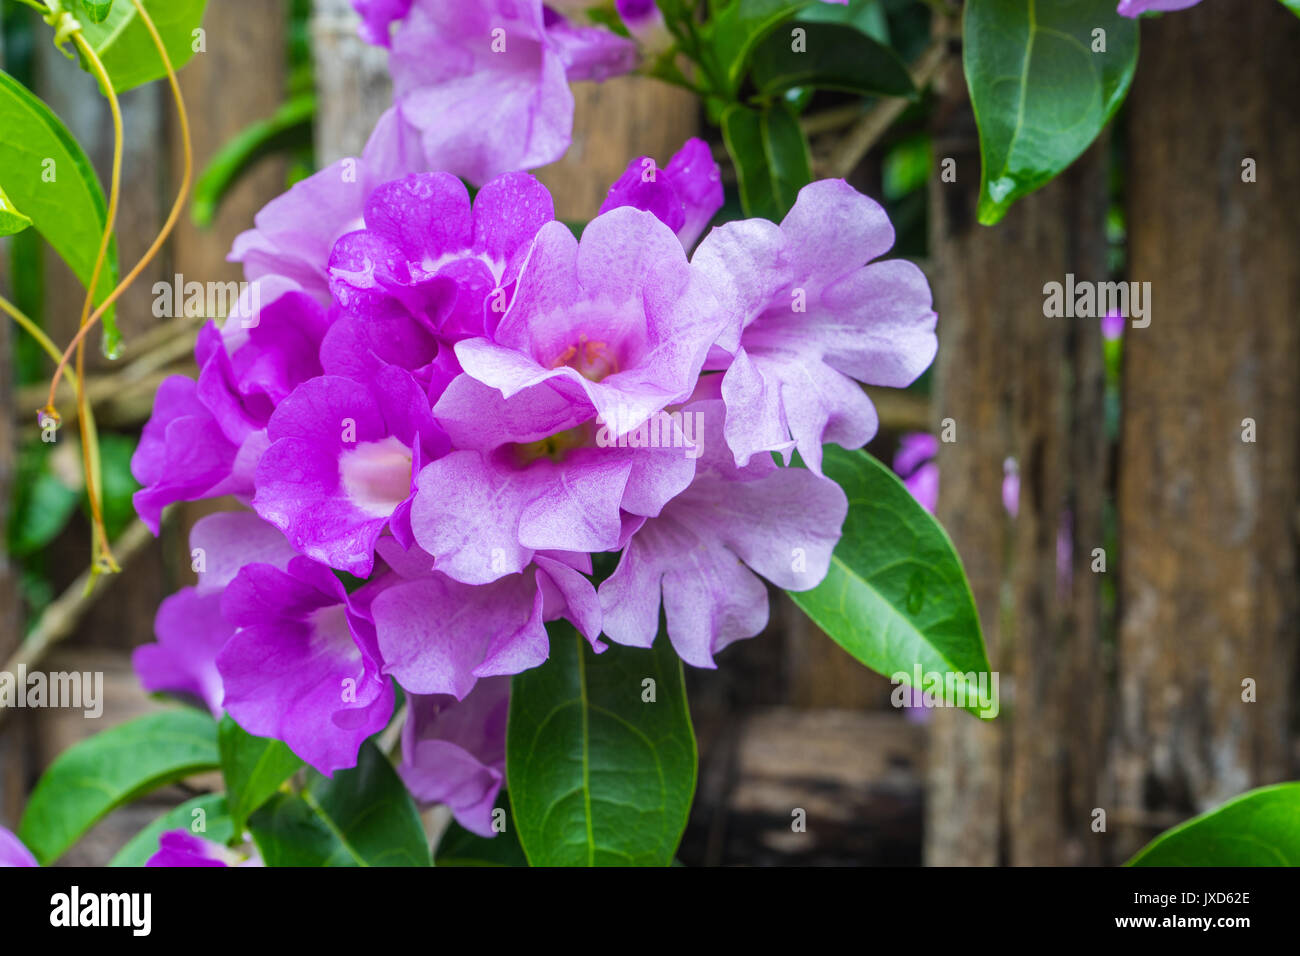 Garlic Vine flower on bamboo fence of rural house in Thailand. Stock Photo